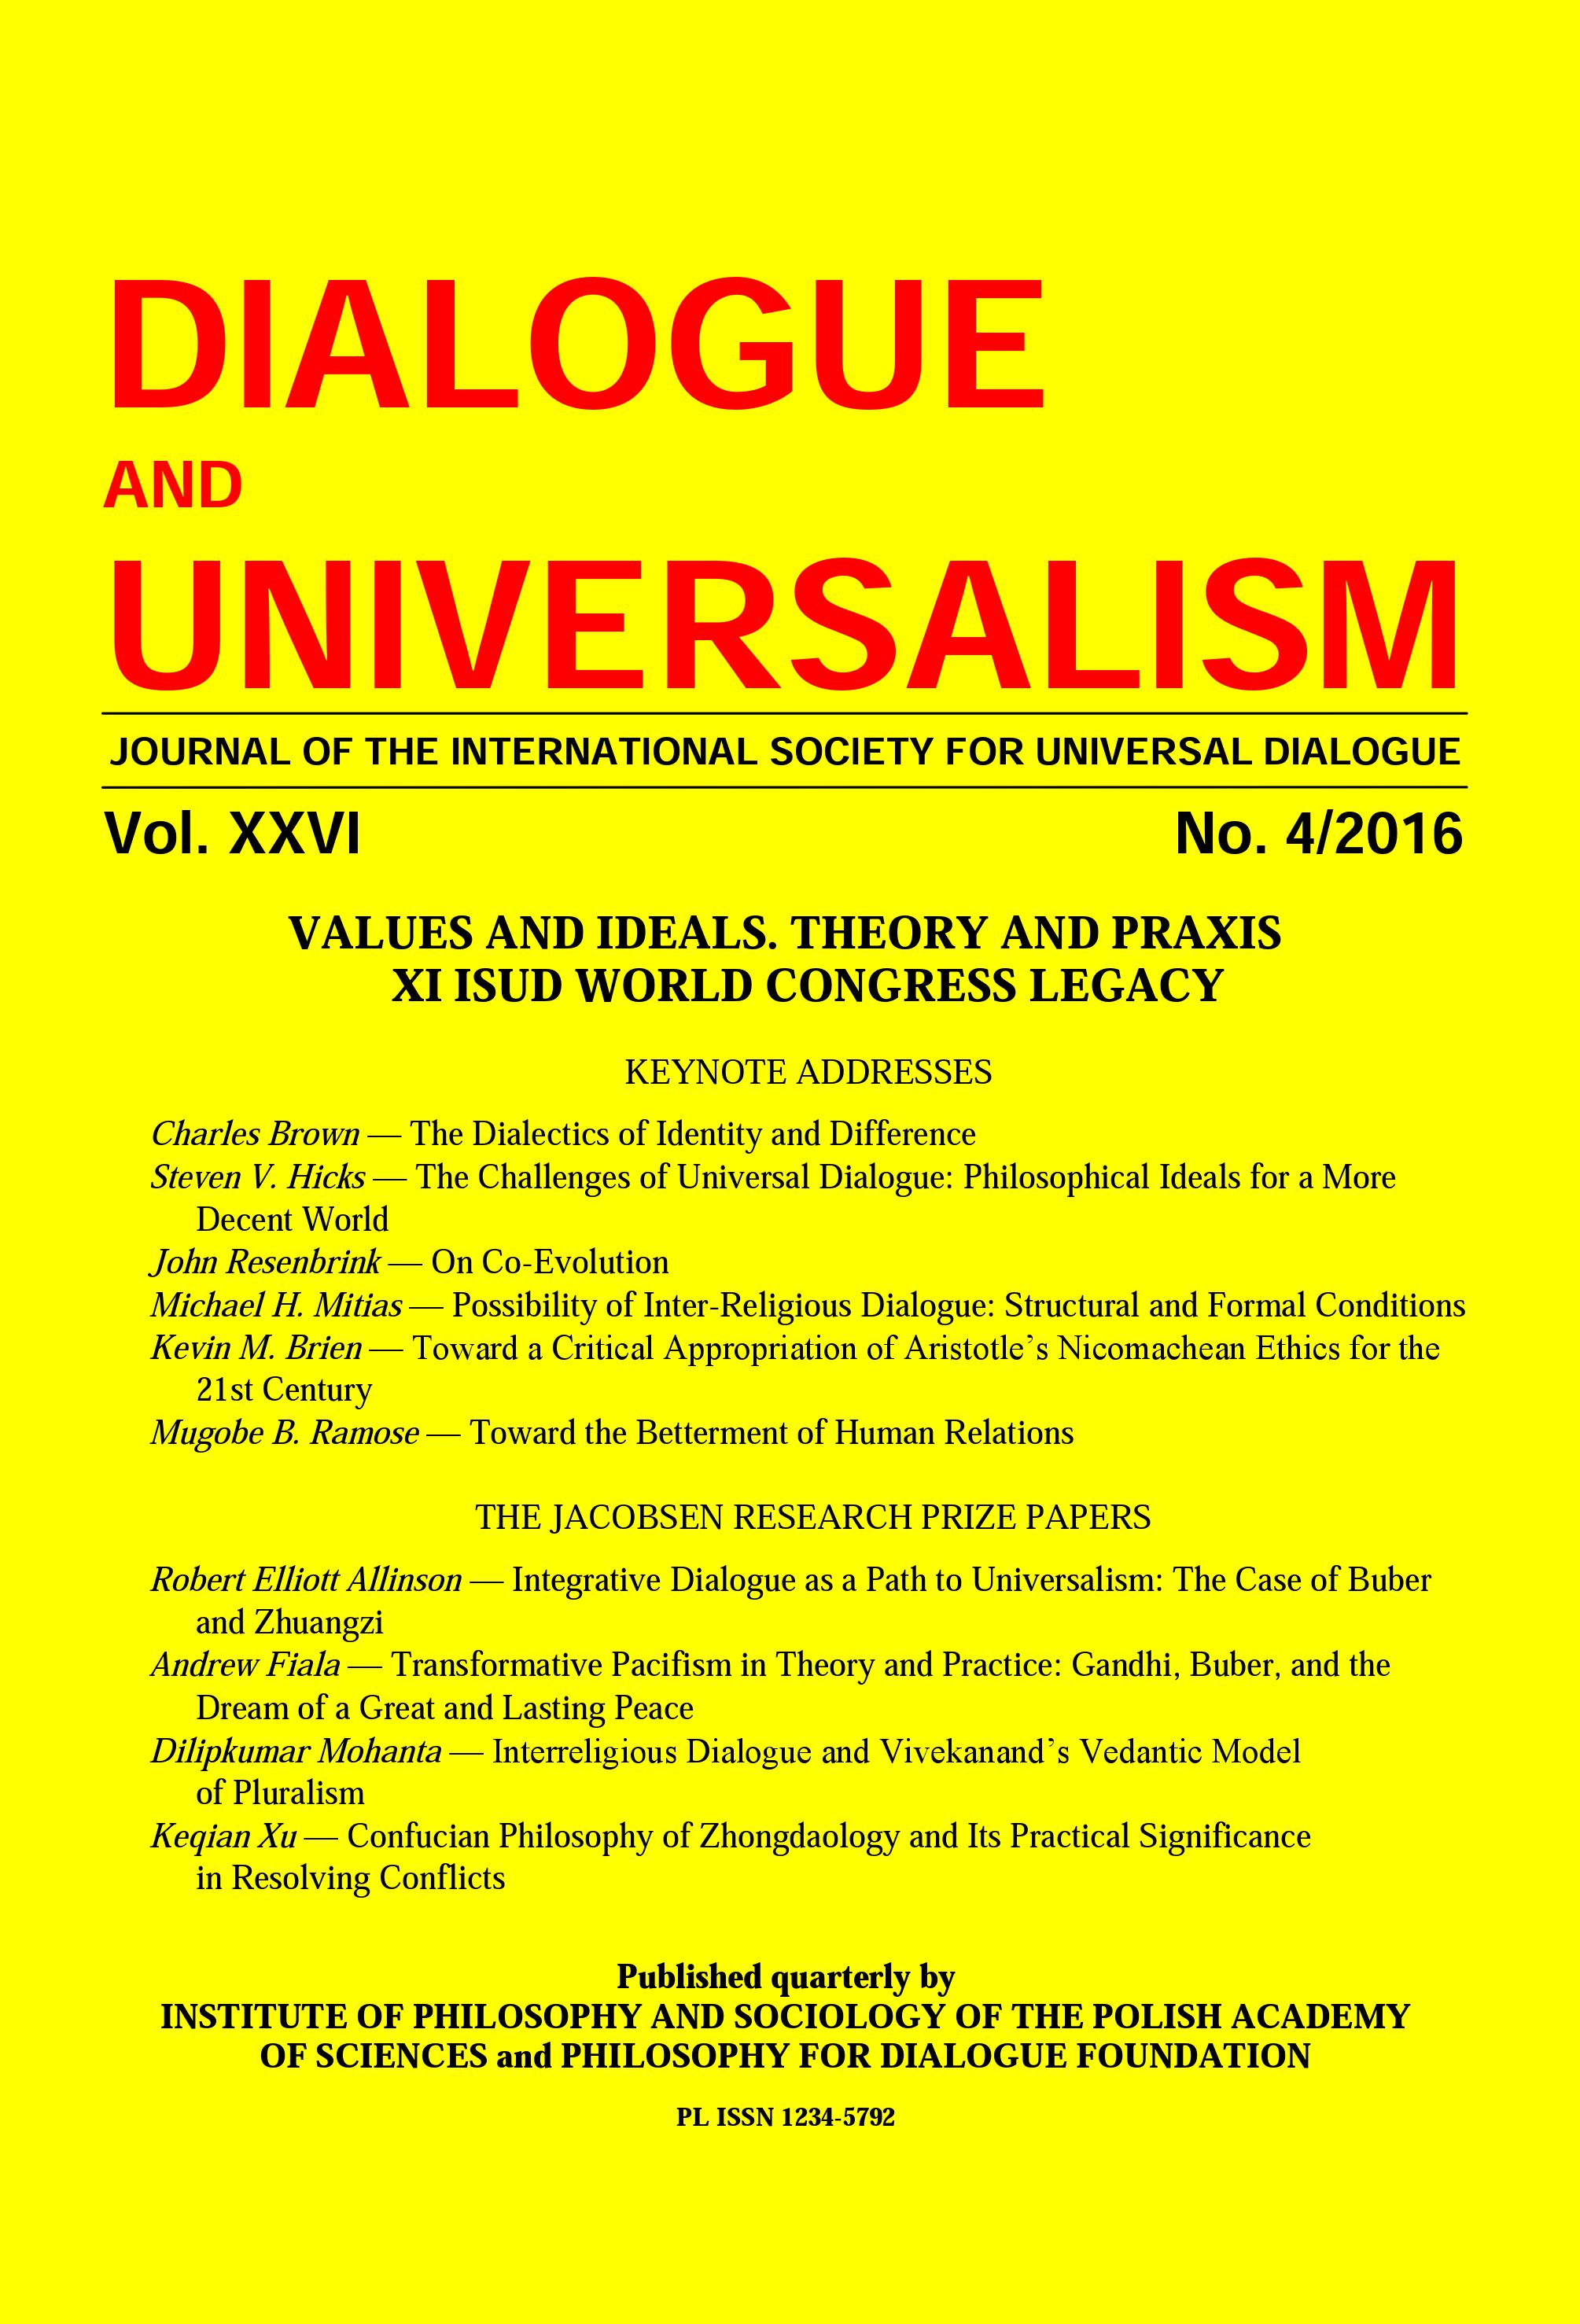 INTERRELIGIOUS DIALOGUE AND VIVEKANAND’S VEDANTIC MODEL OF PLURALISM Cover Image